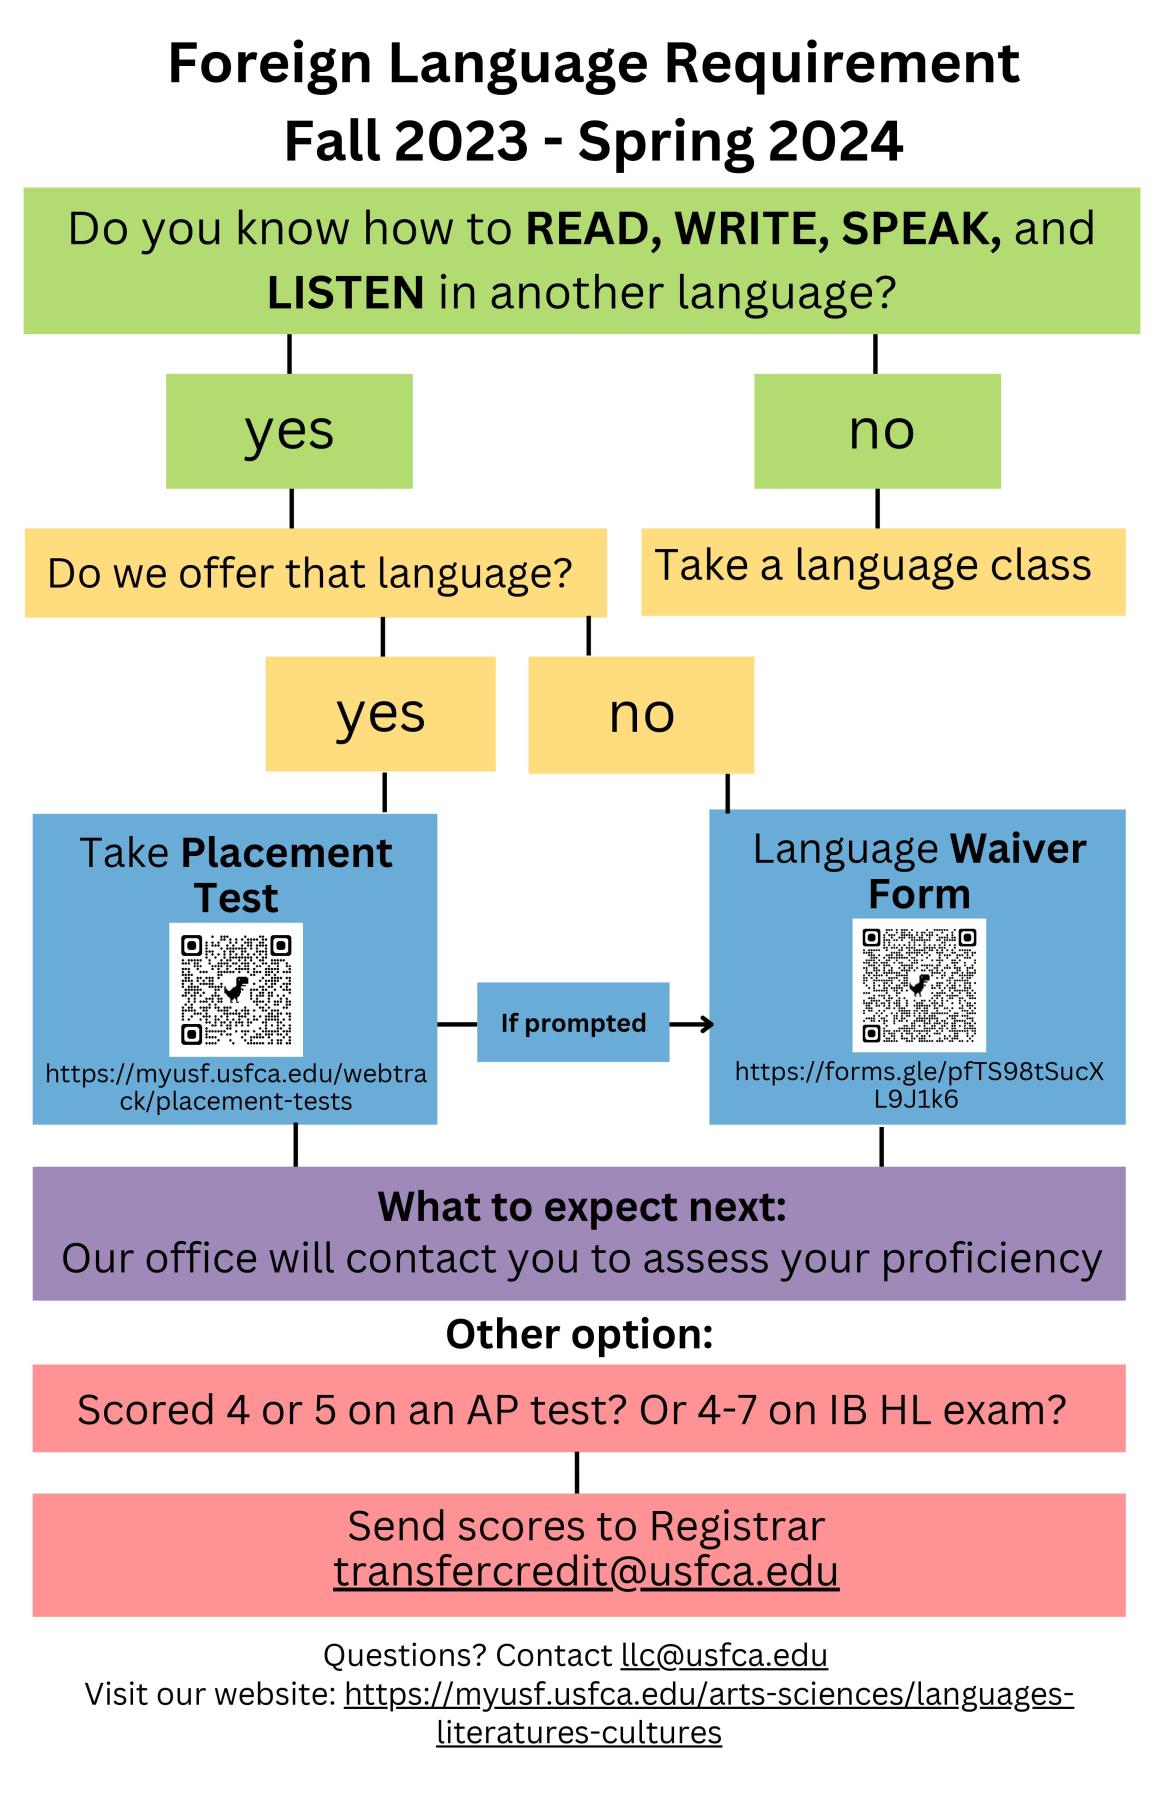 visual that explains steps for the language waiver in a simple way